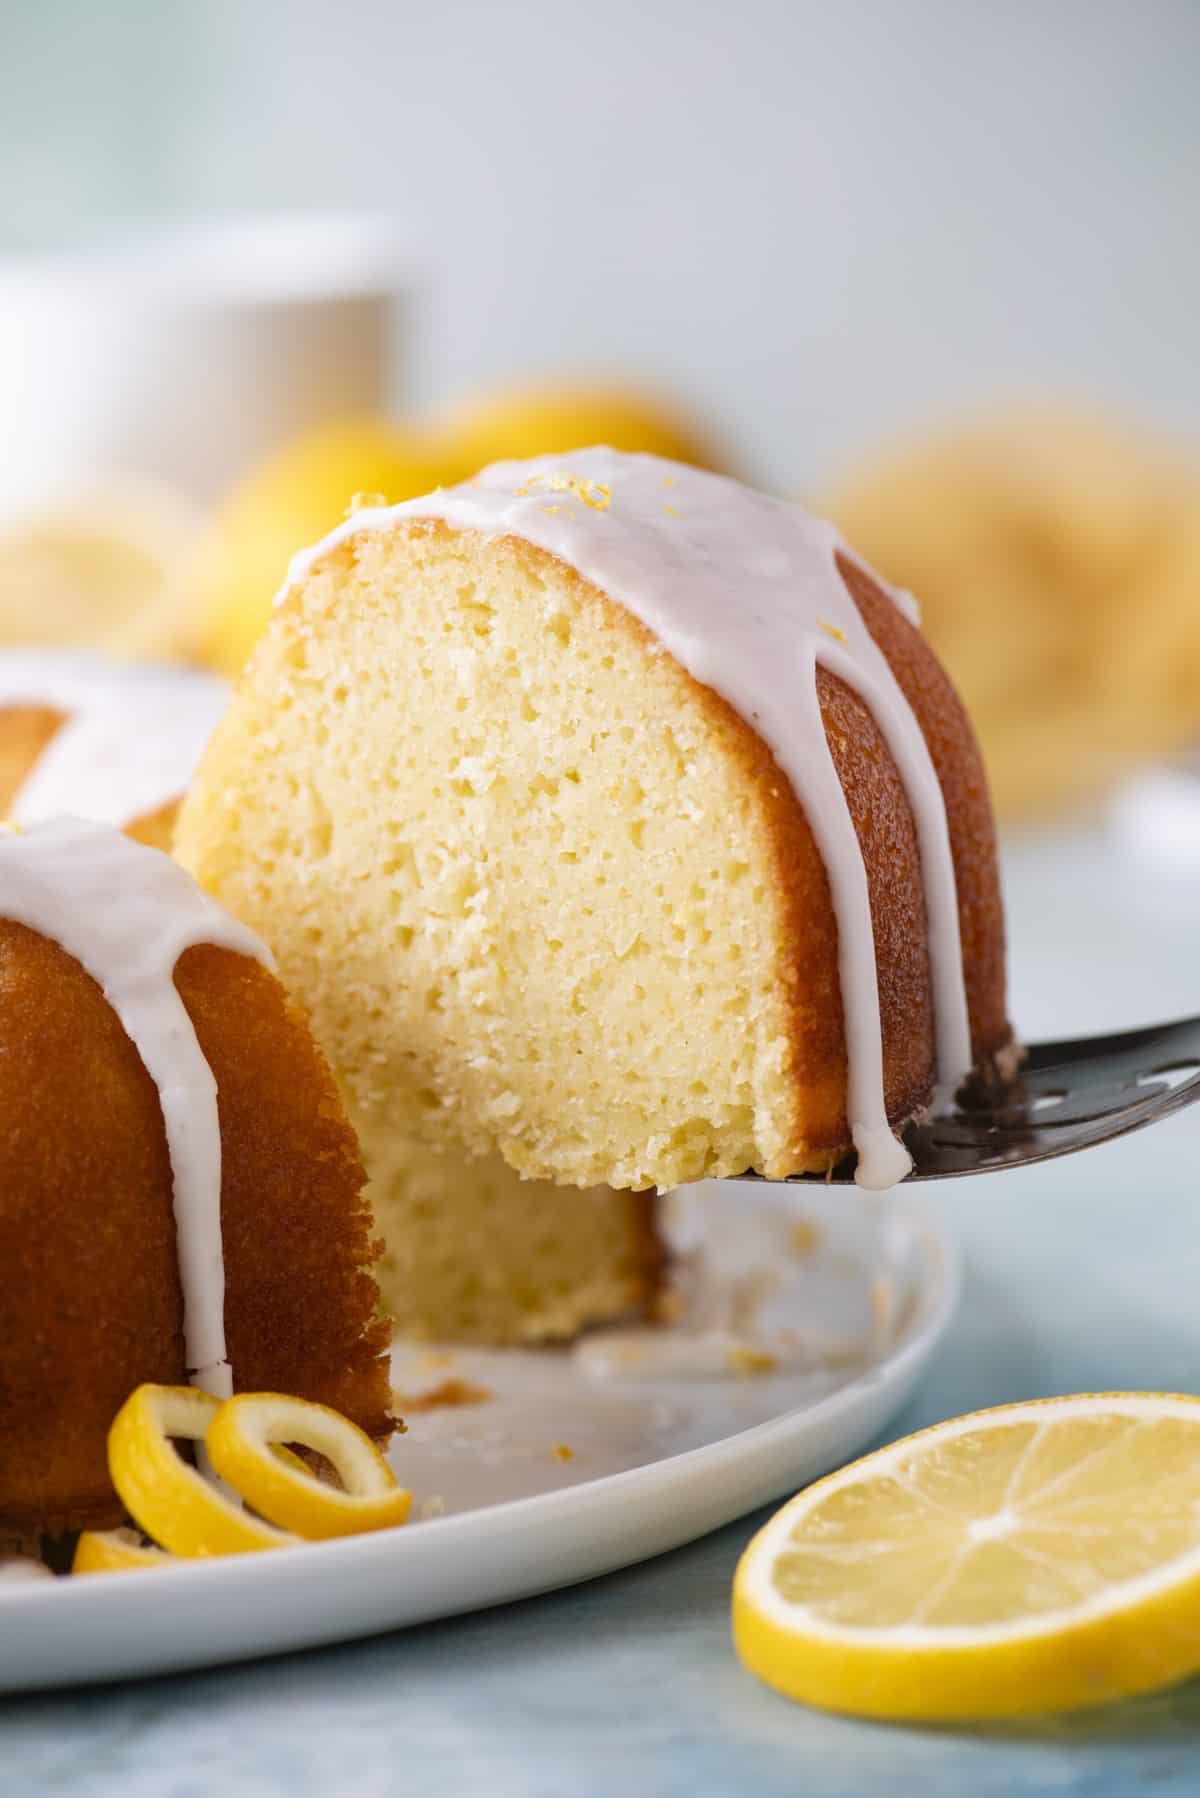 a slice of lemon bundt cake being lifted away from the rest of the cake off a white plate sitting on a blue surface with a fresh lemon slice beside it